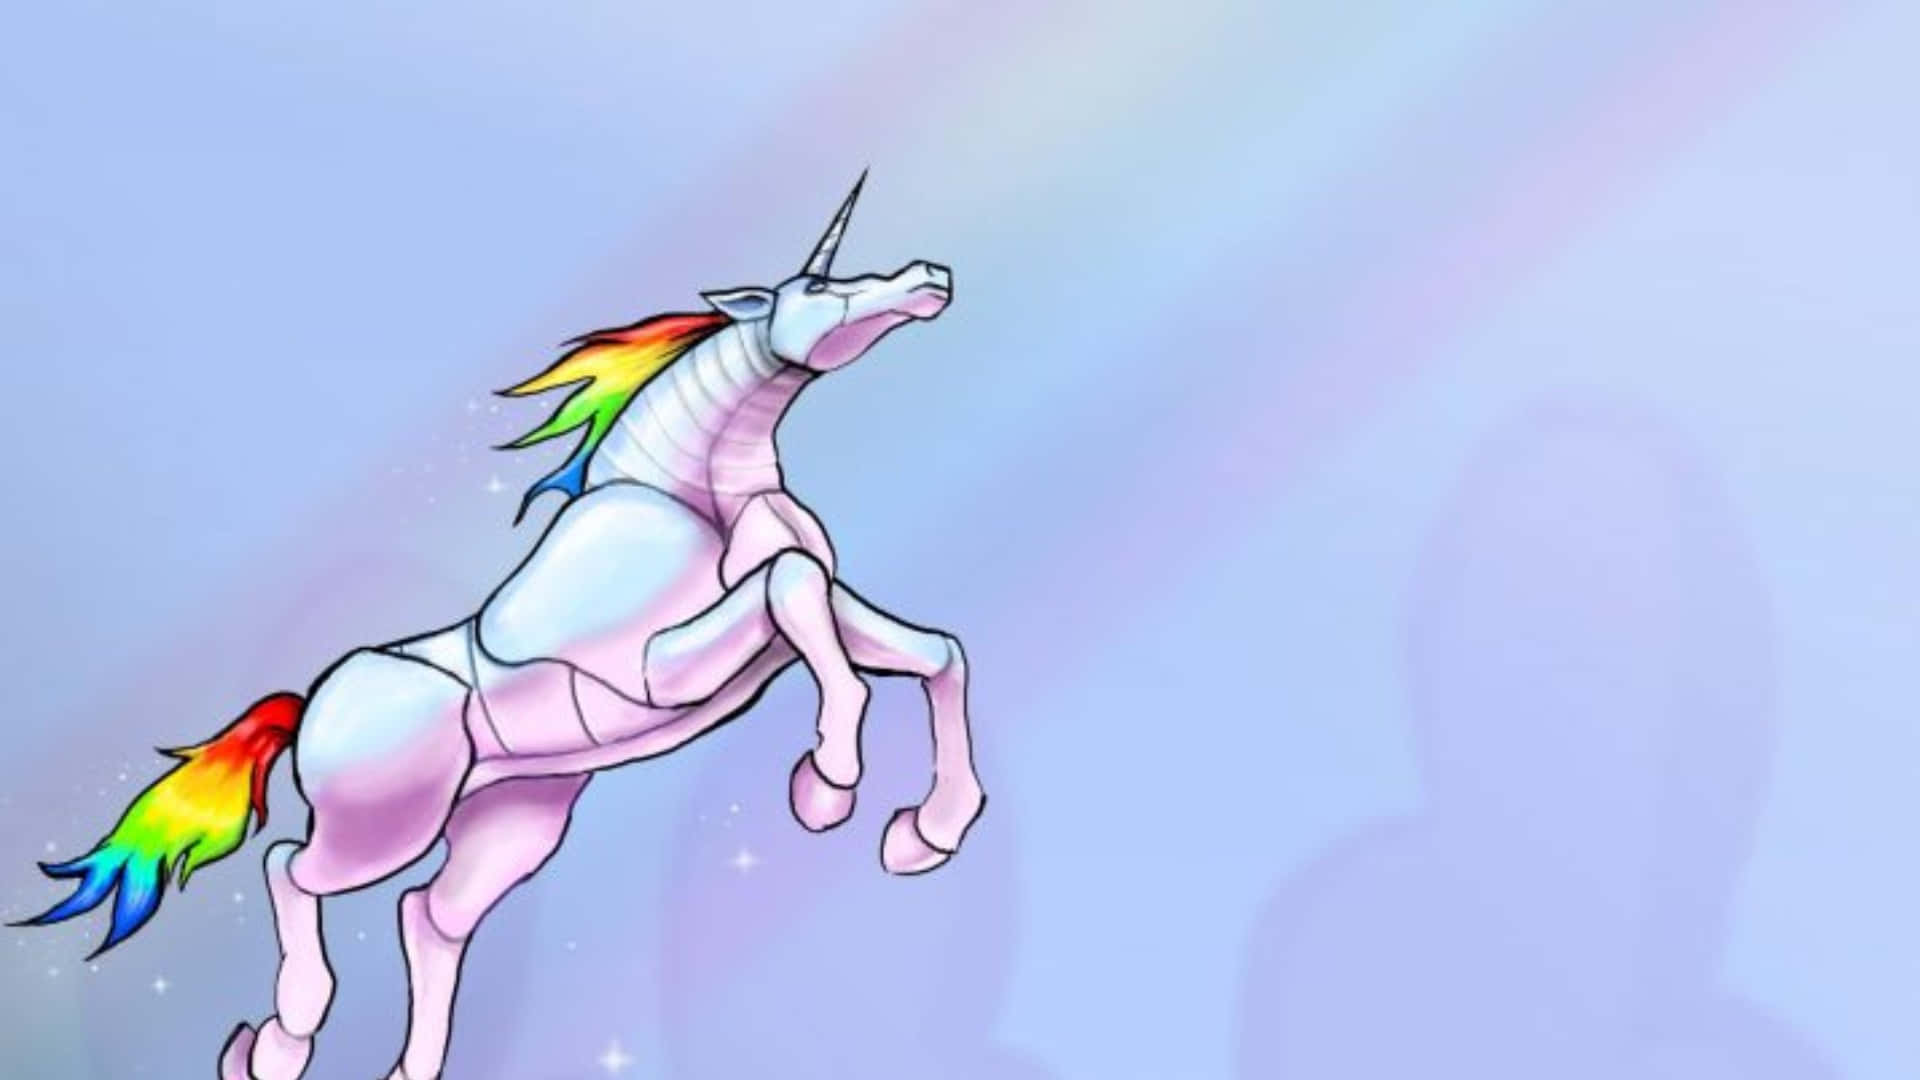 Leaping Unicorn With Colorful Hair Background